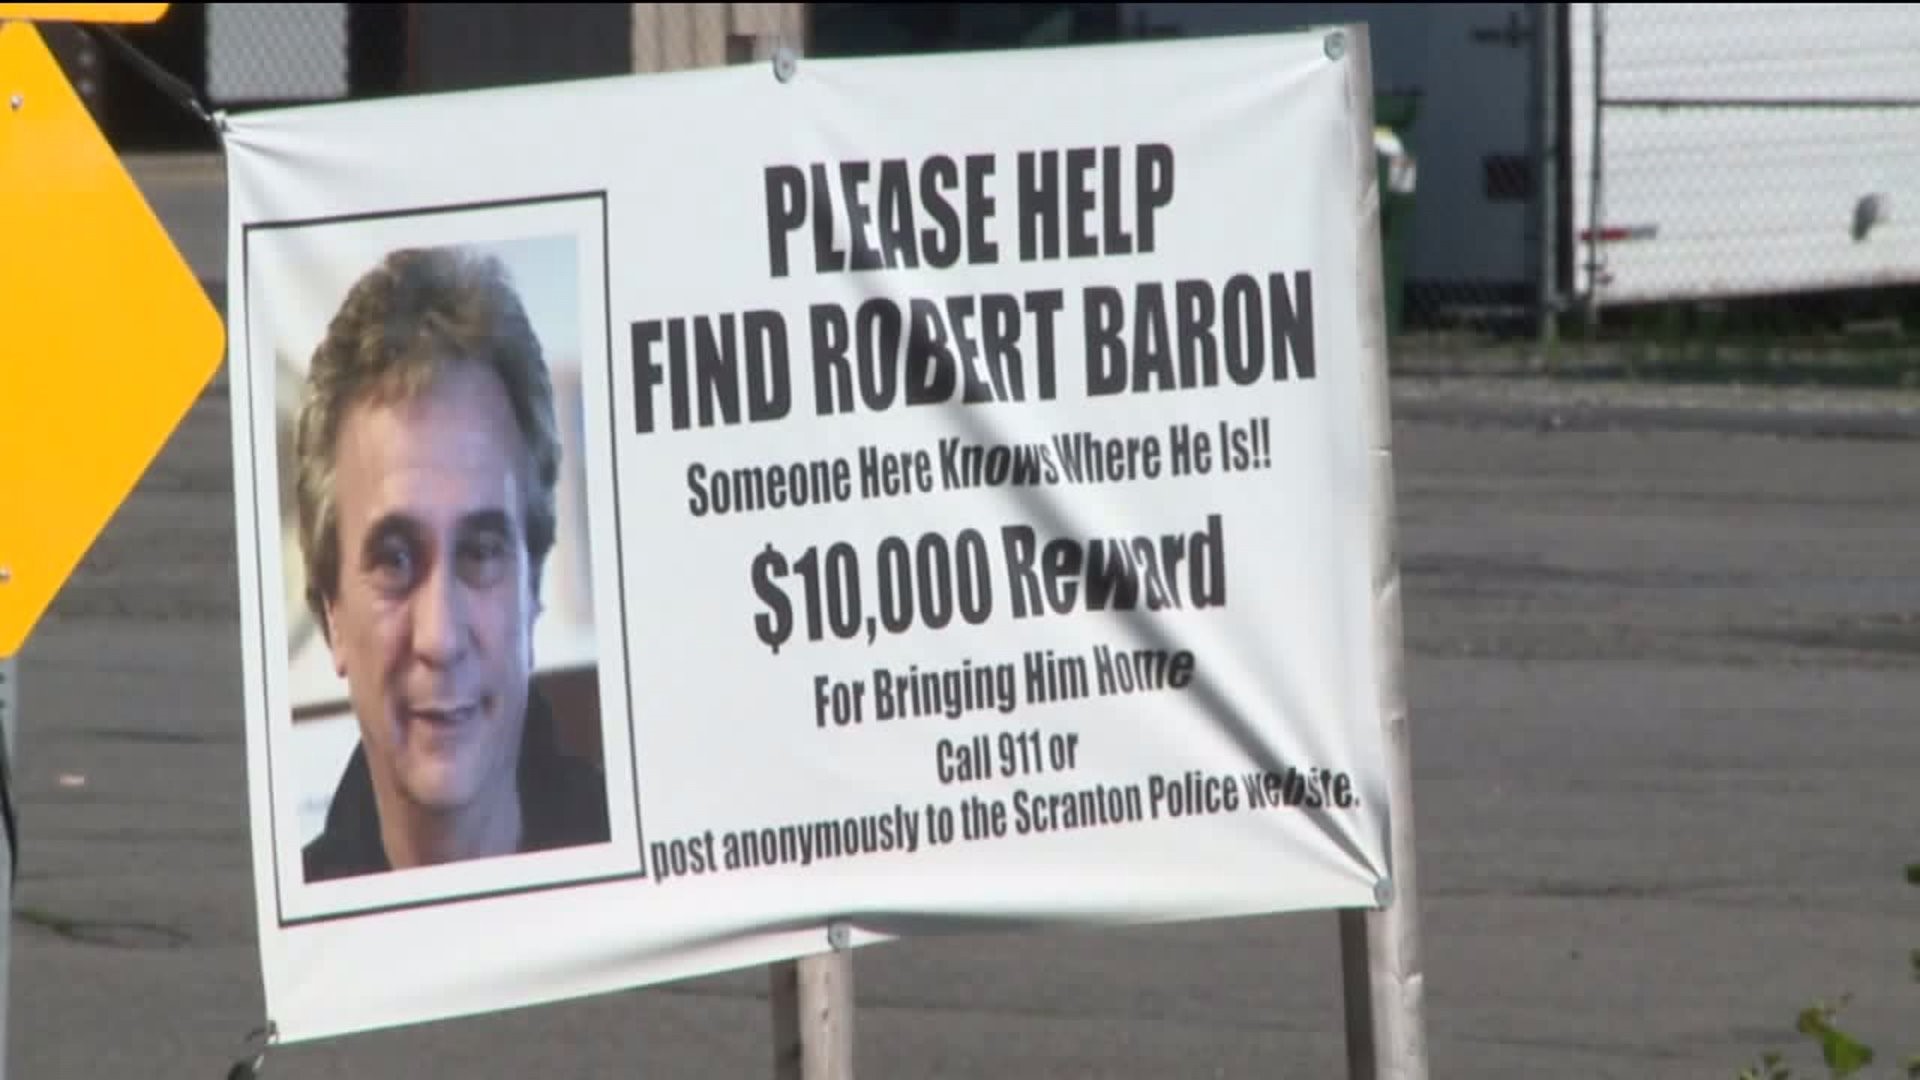 Two Years Since Disappearance of Robert Baron